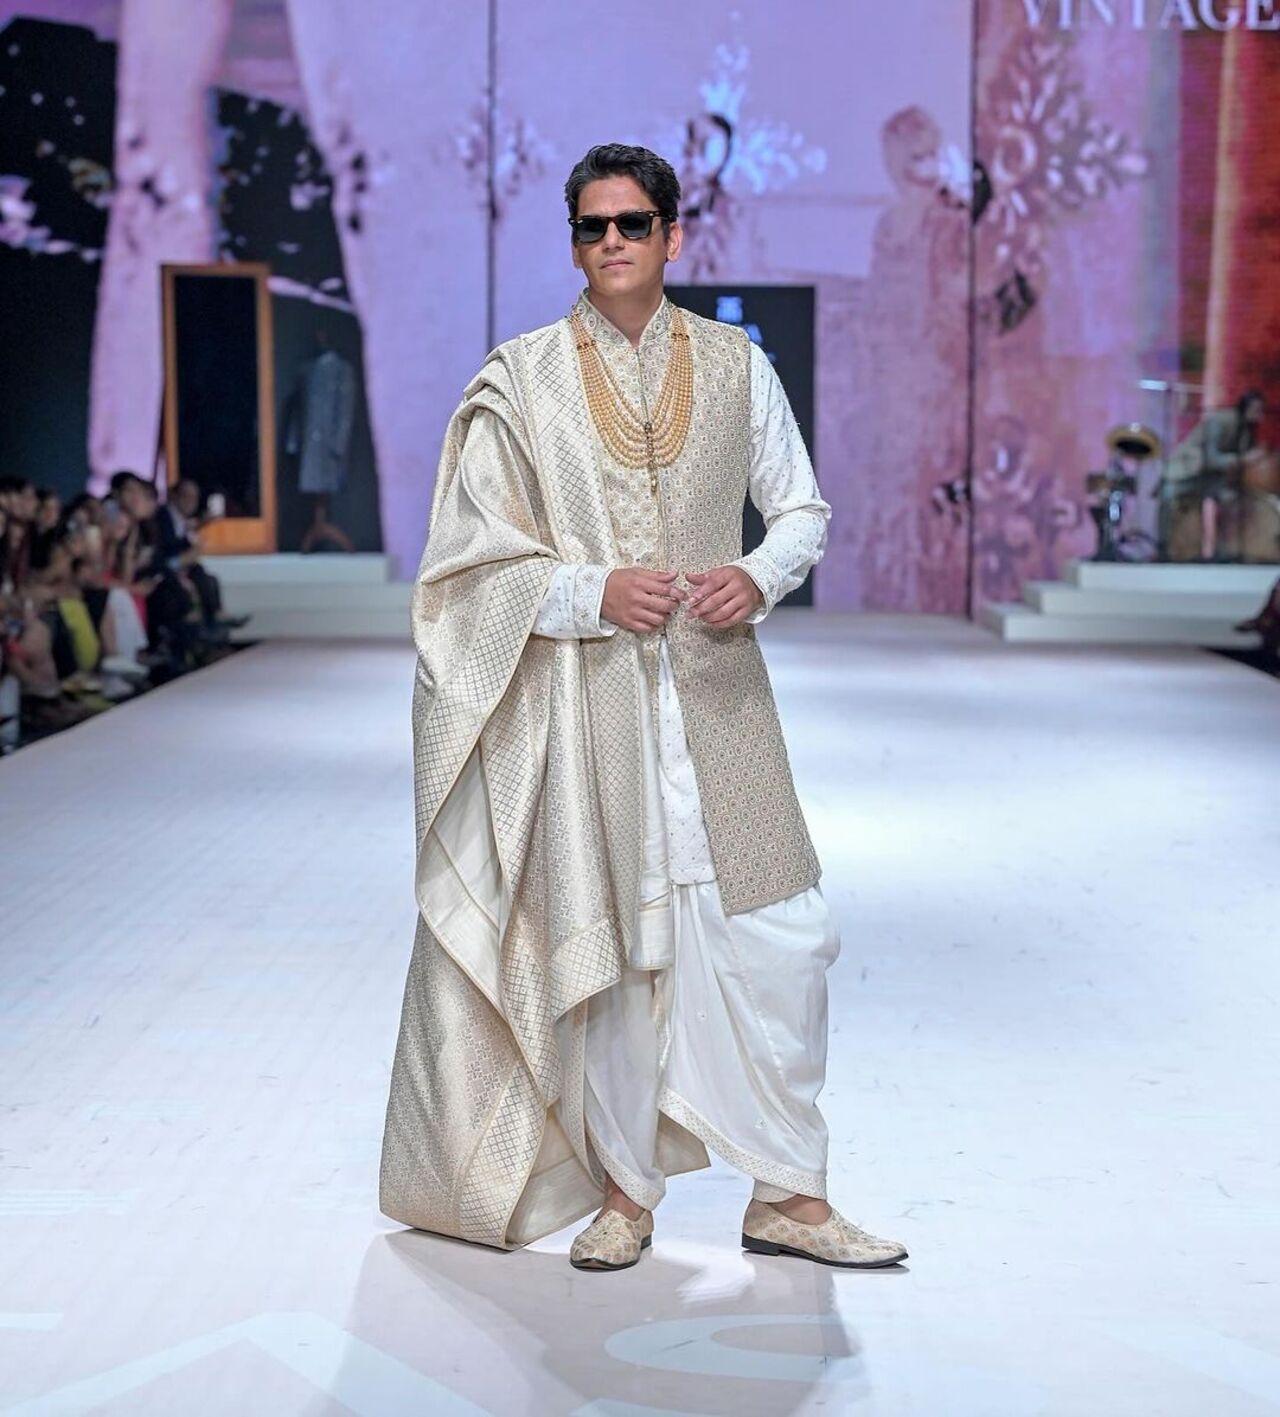 Vijay Varma looked wedding ready in this royal white outfit